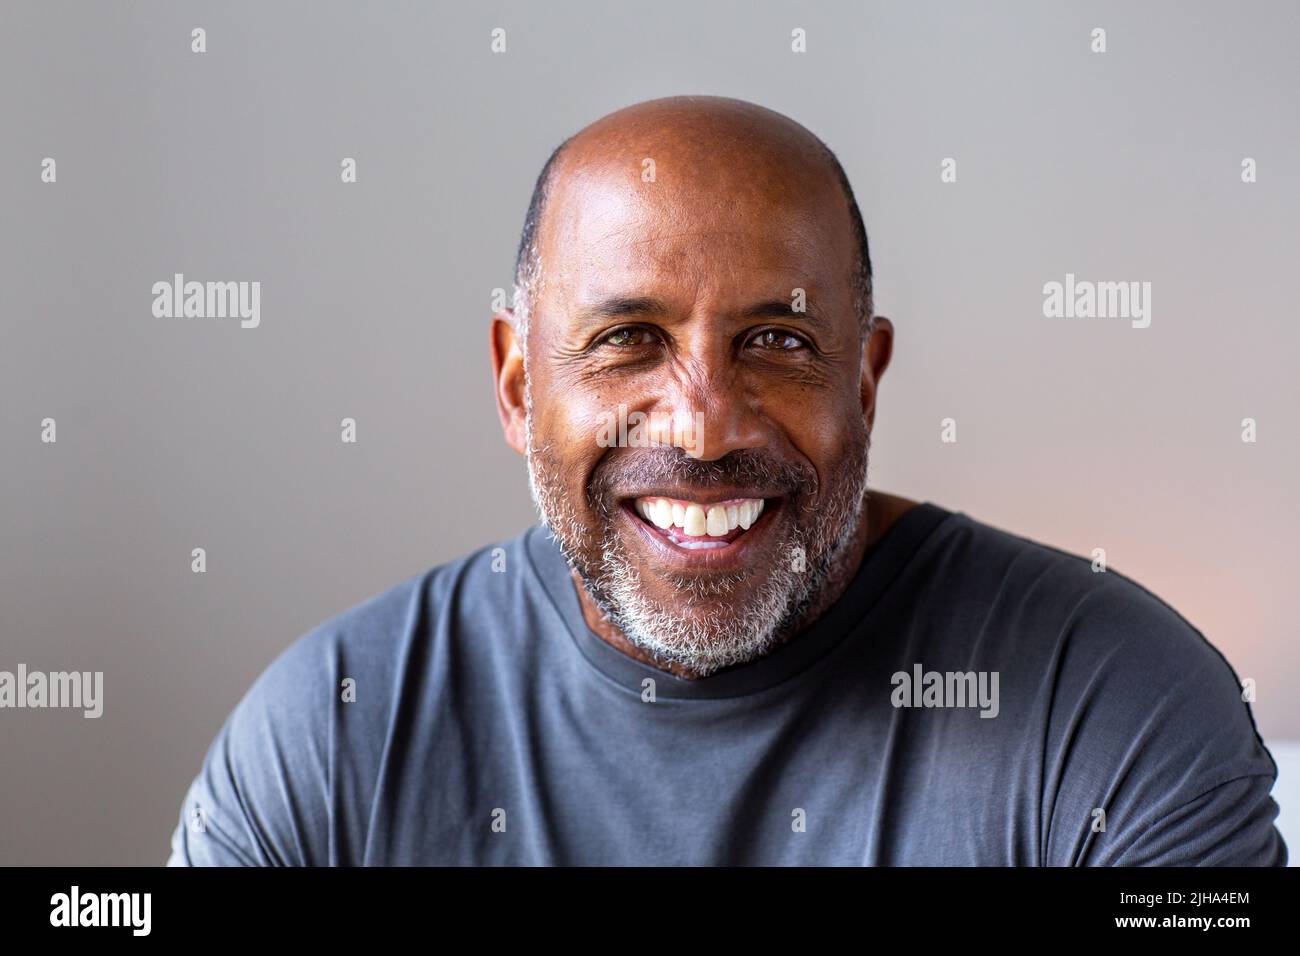 Happy attractive older African American man smiling. Stock Photo